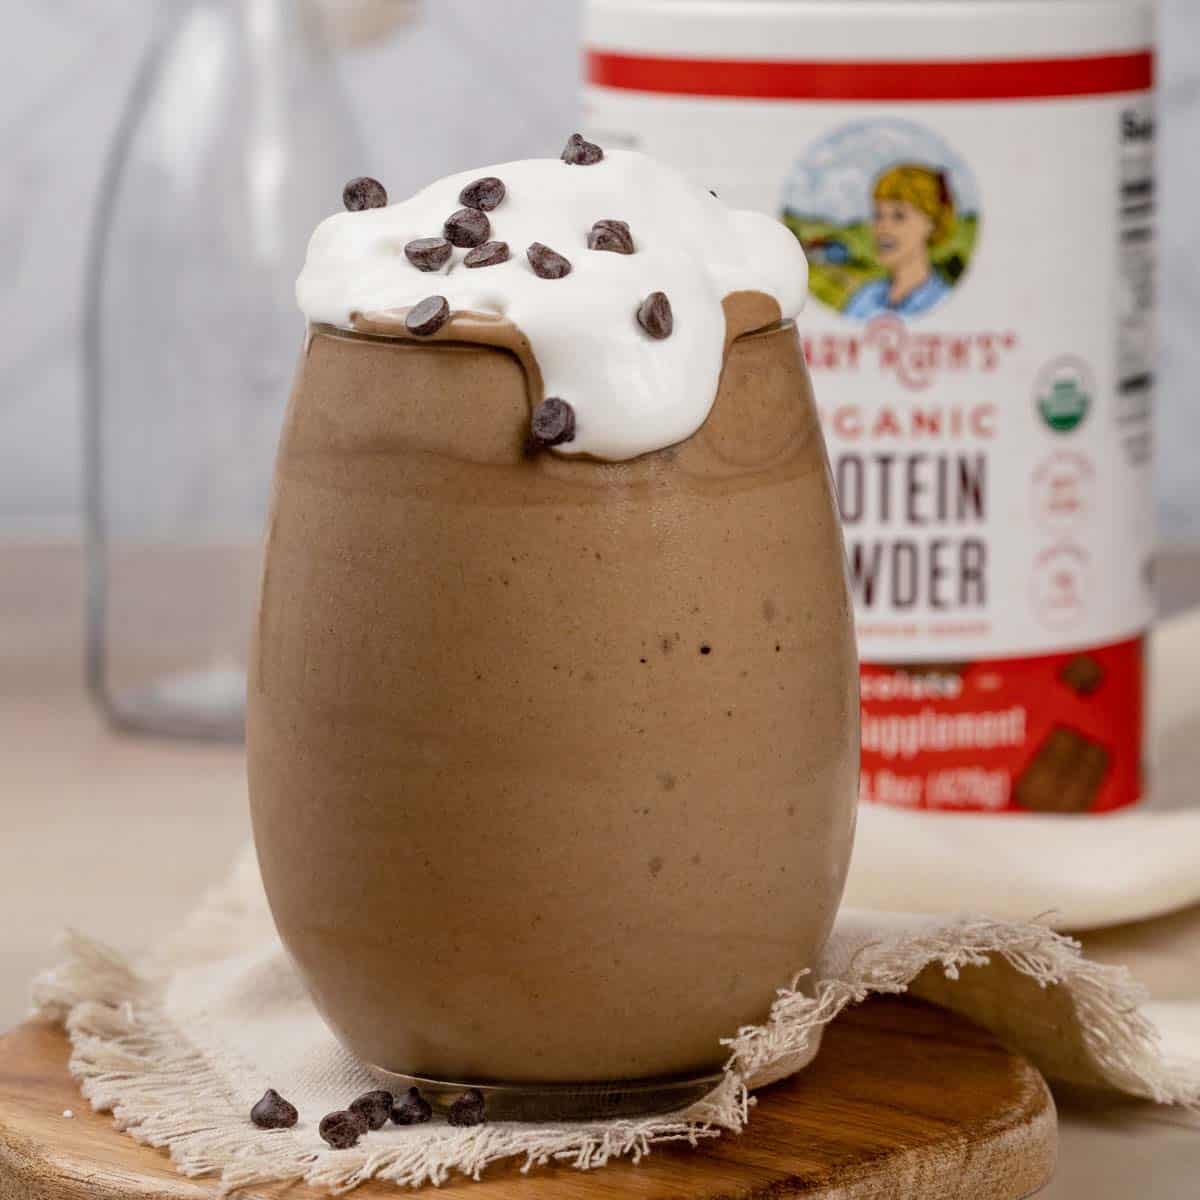 A glass filled with chocolate protein shake with whipped cream and mini chocolate chips on top. More chips and a few straws are next to the glass. The bottle of protein powder is blurred in the background.